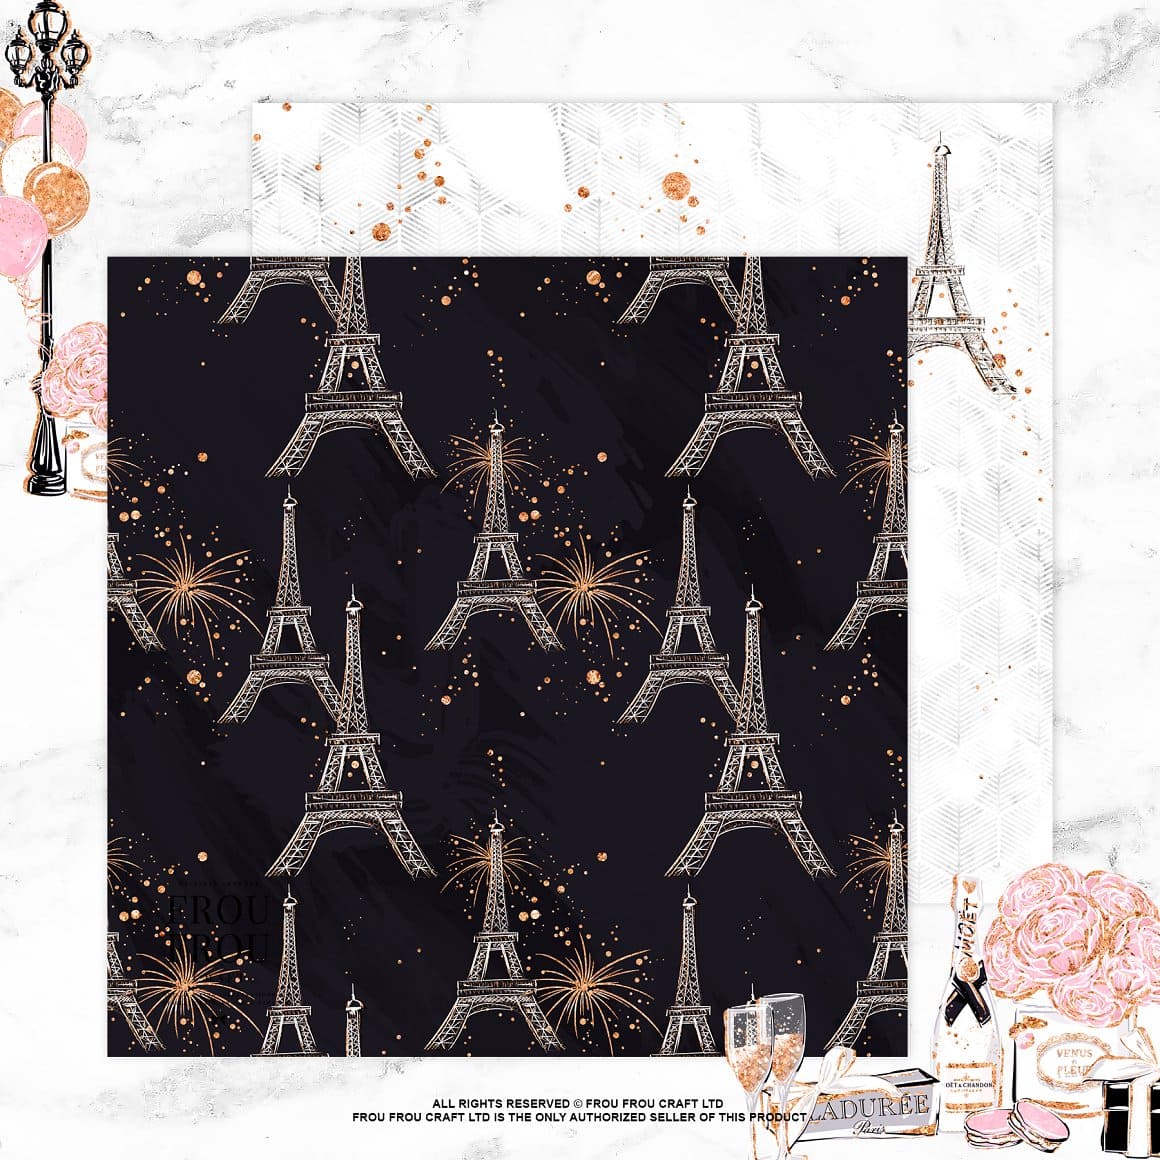 The Eiffel Tower and fireworks are depicted on the black background of the pattern.